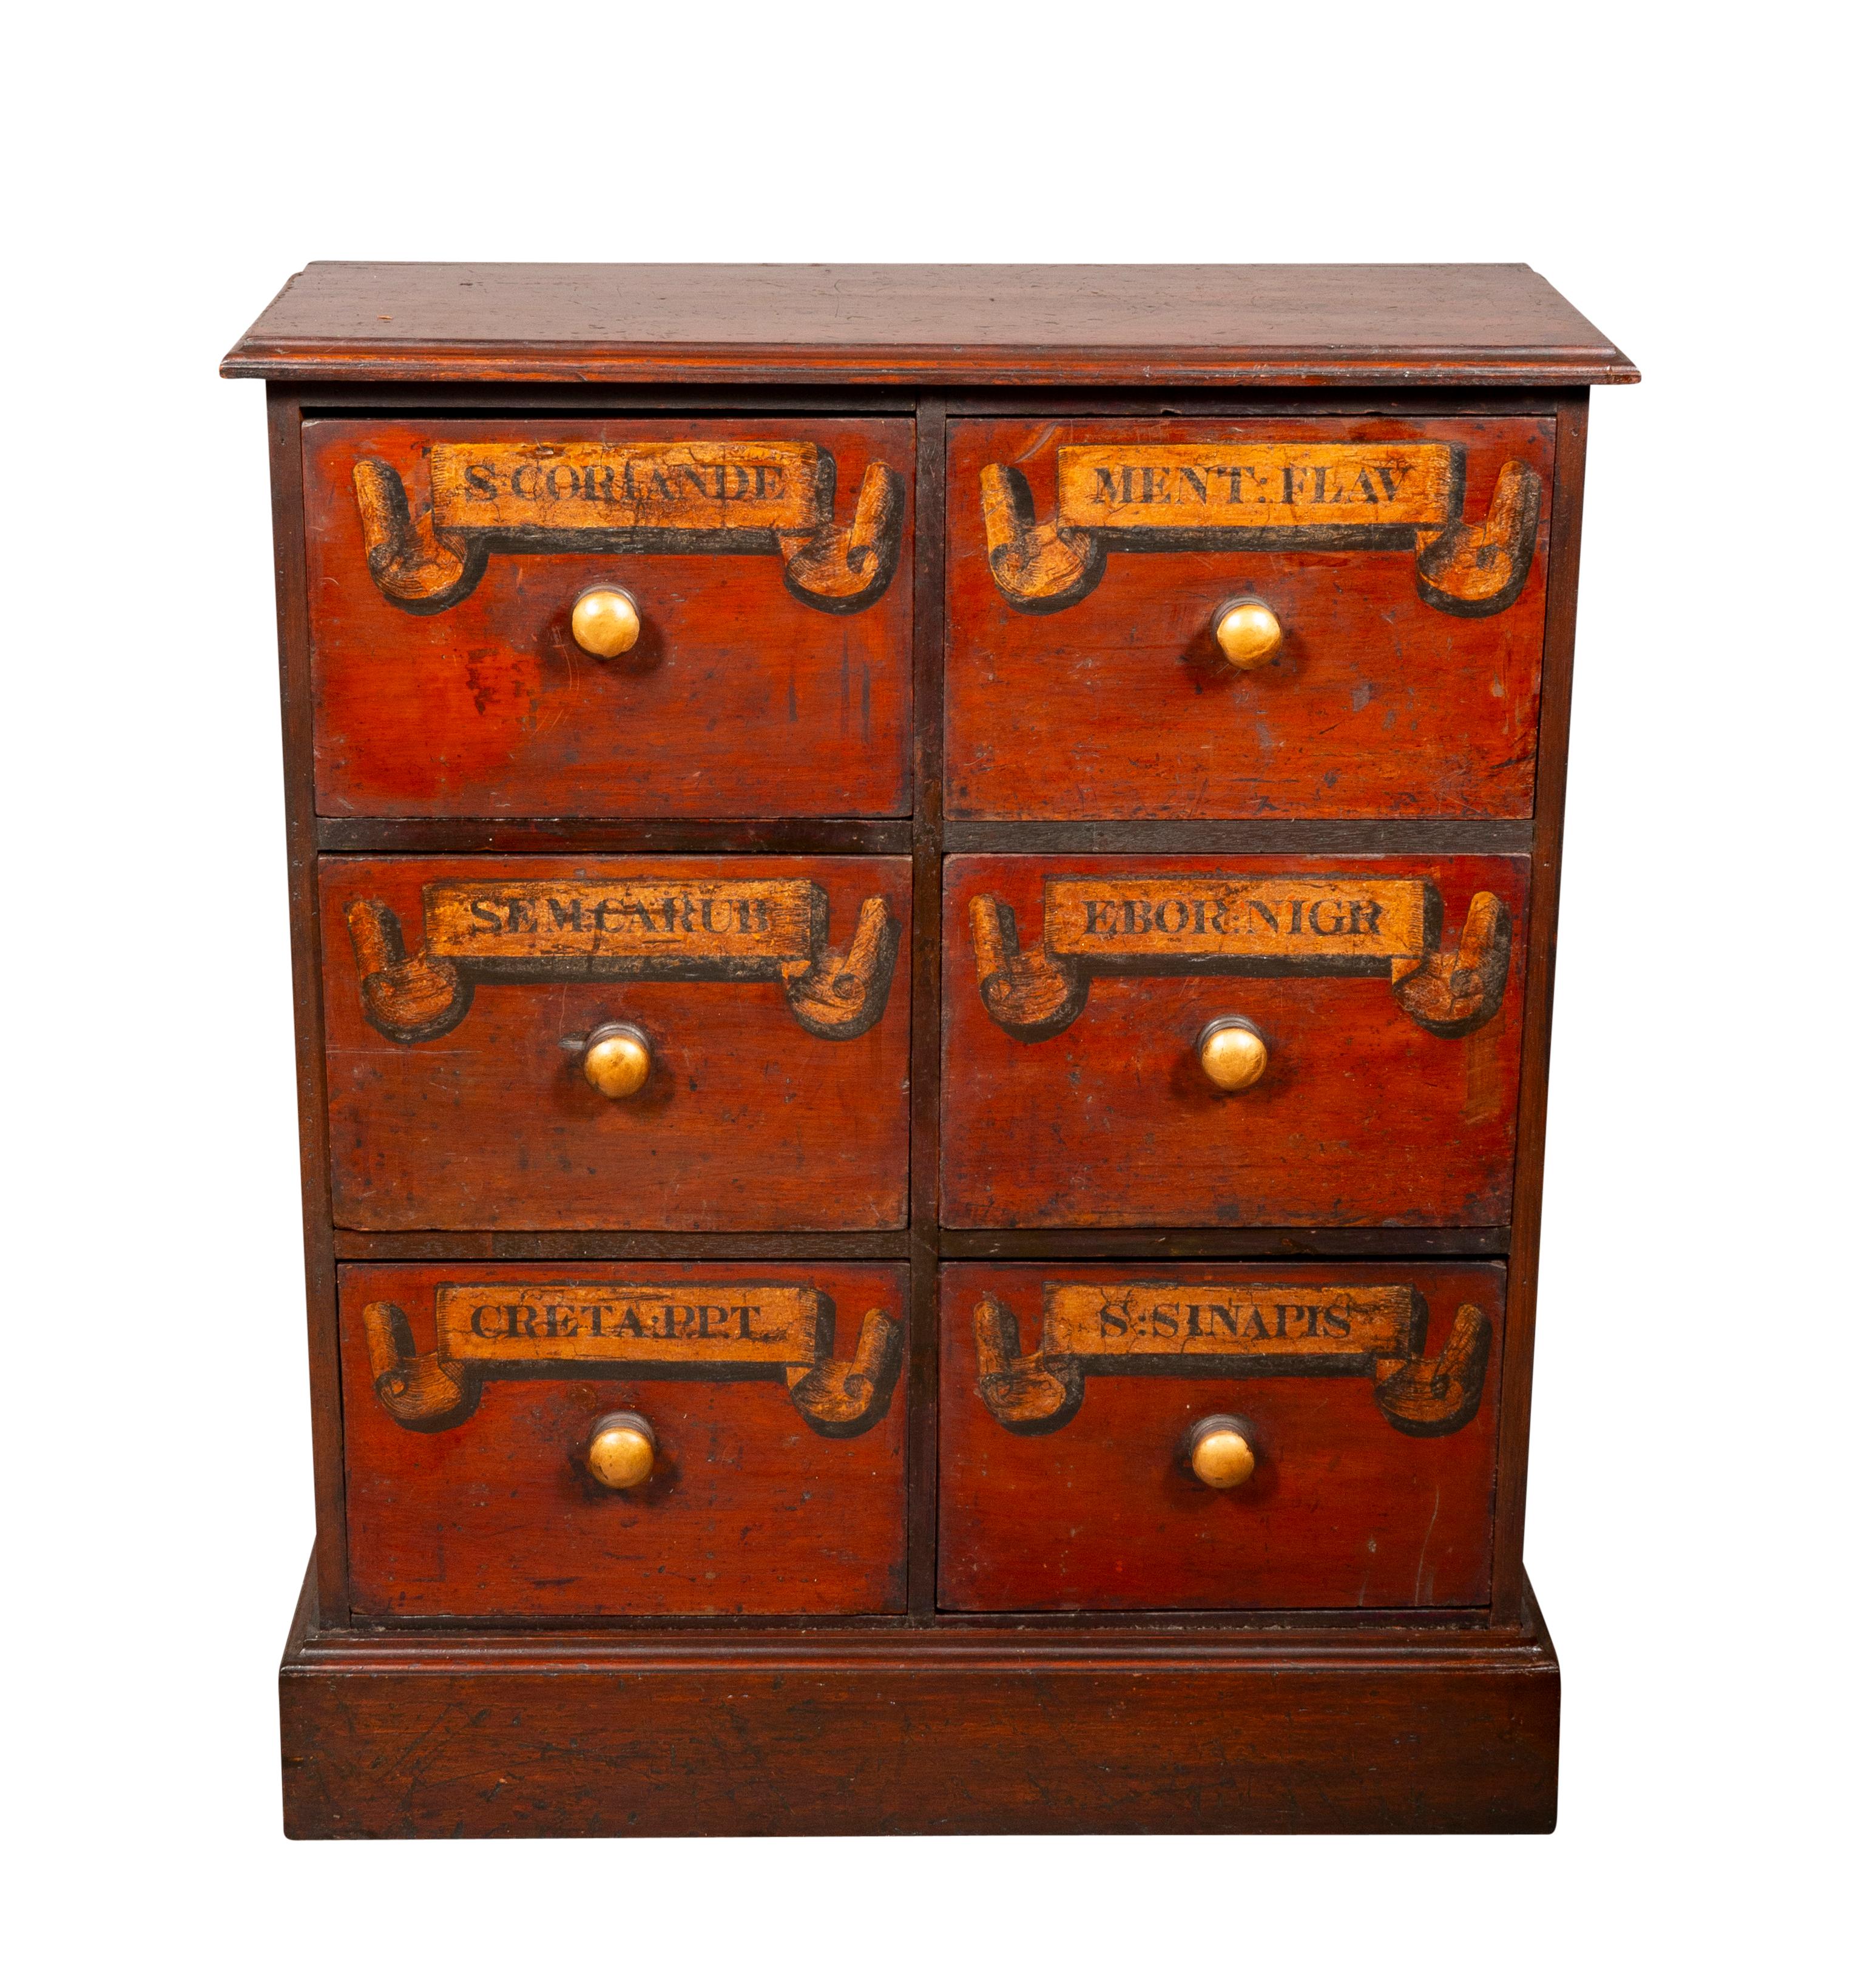 Each with a rectangular top over six drawers with a red wash and gilt lettering. Wood knobs. Plinth base.